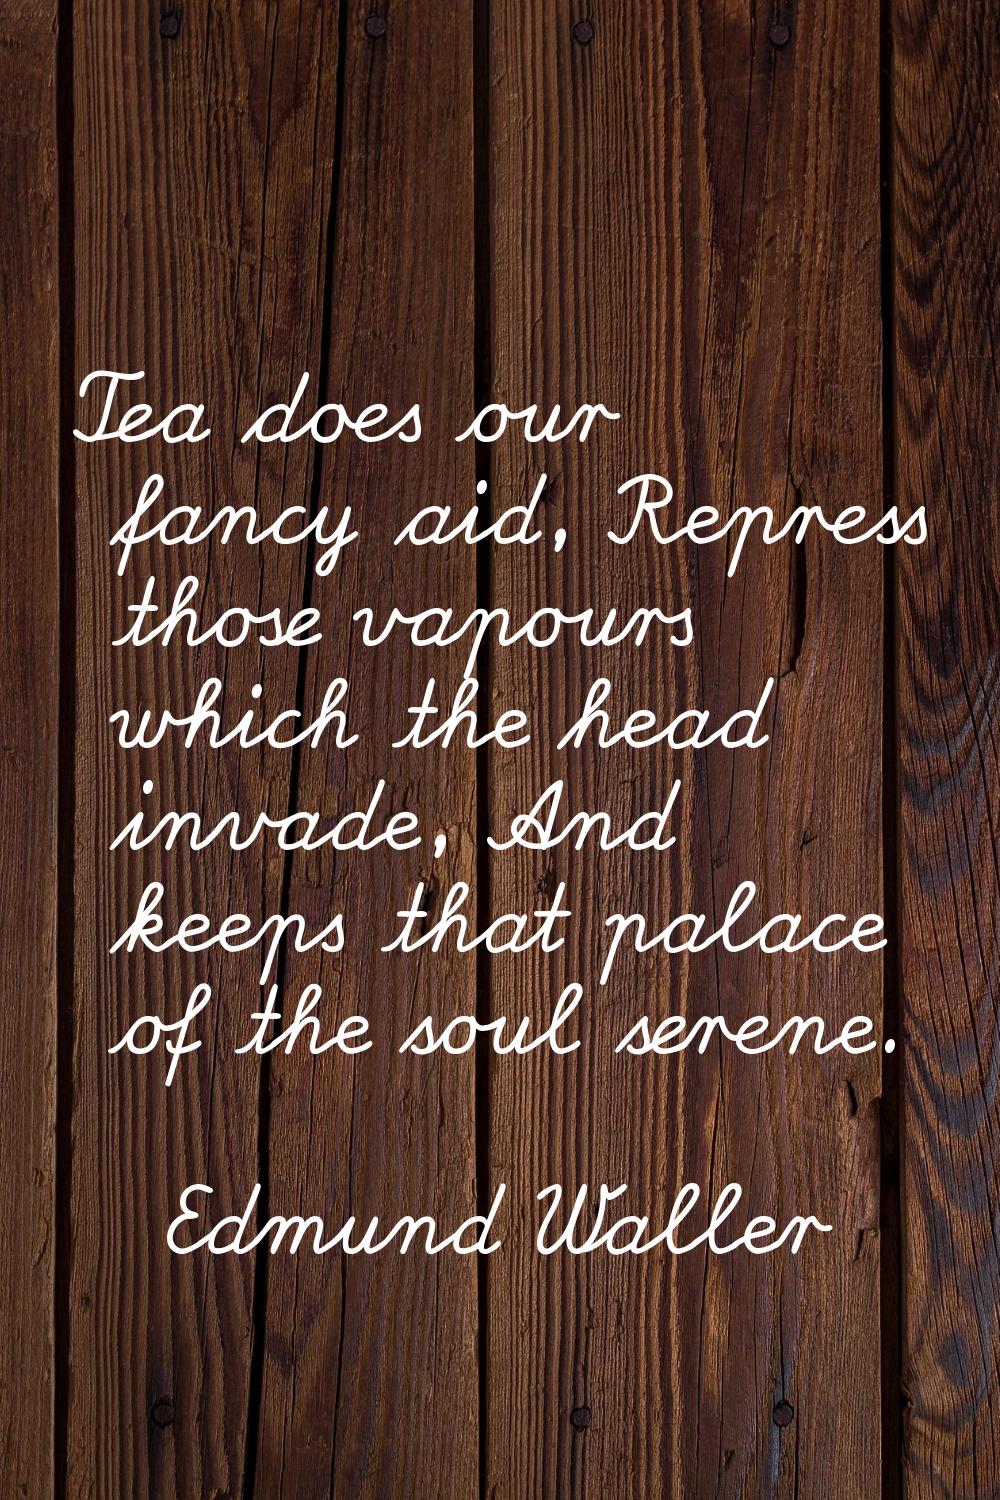 Tea does our fancy aid, Repress those vapours which the head invade, And keeps that palace of the s